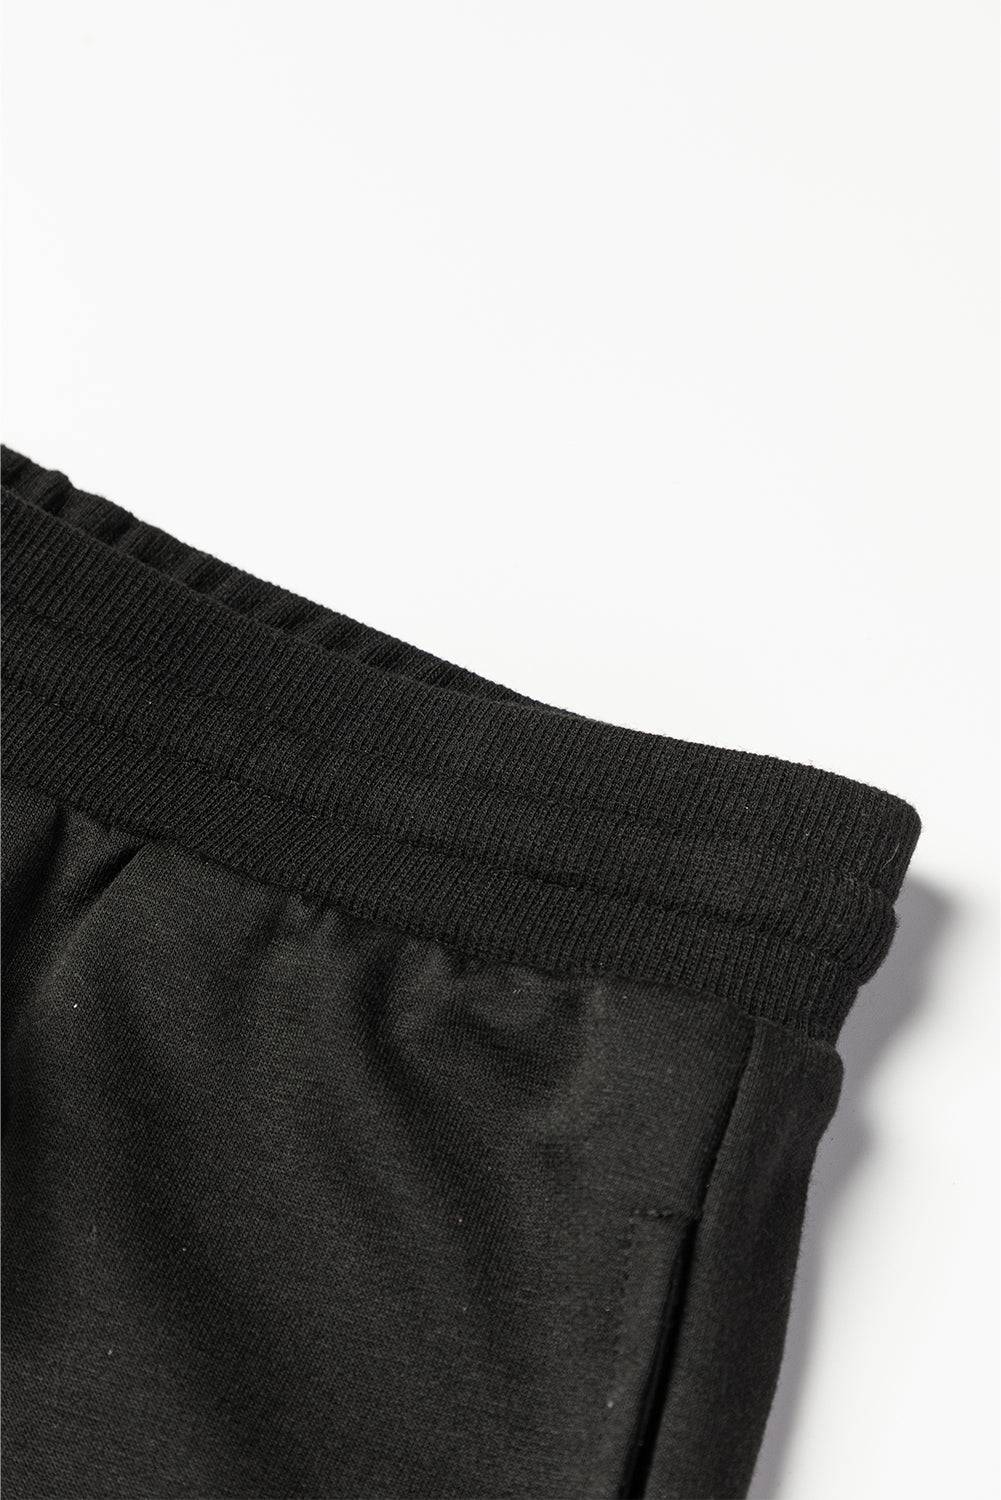 a close up of a pair of black pants